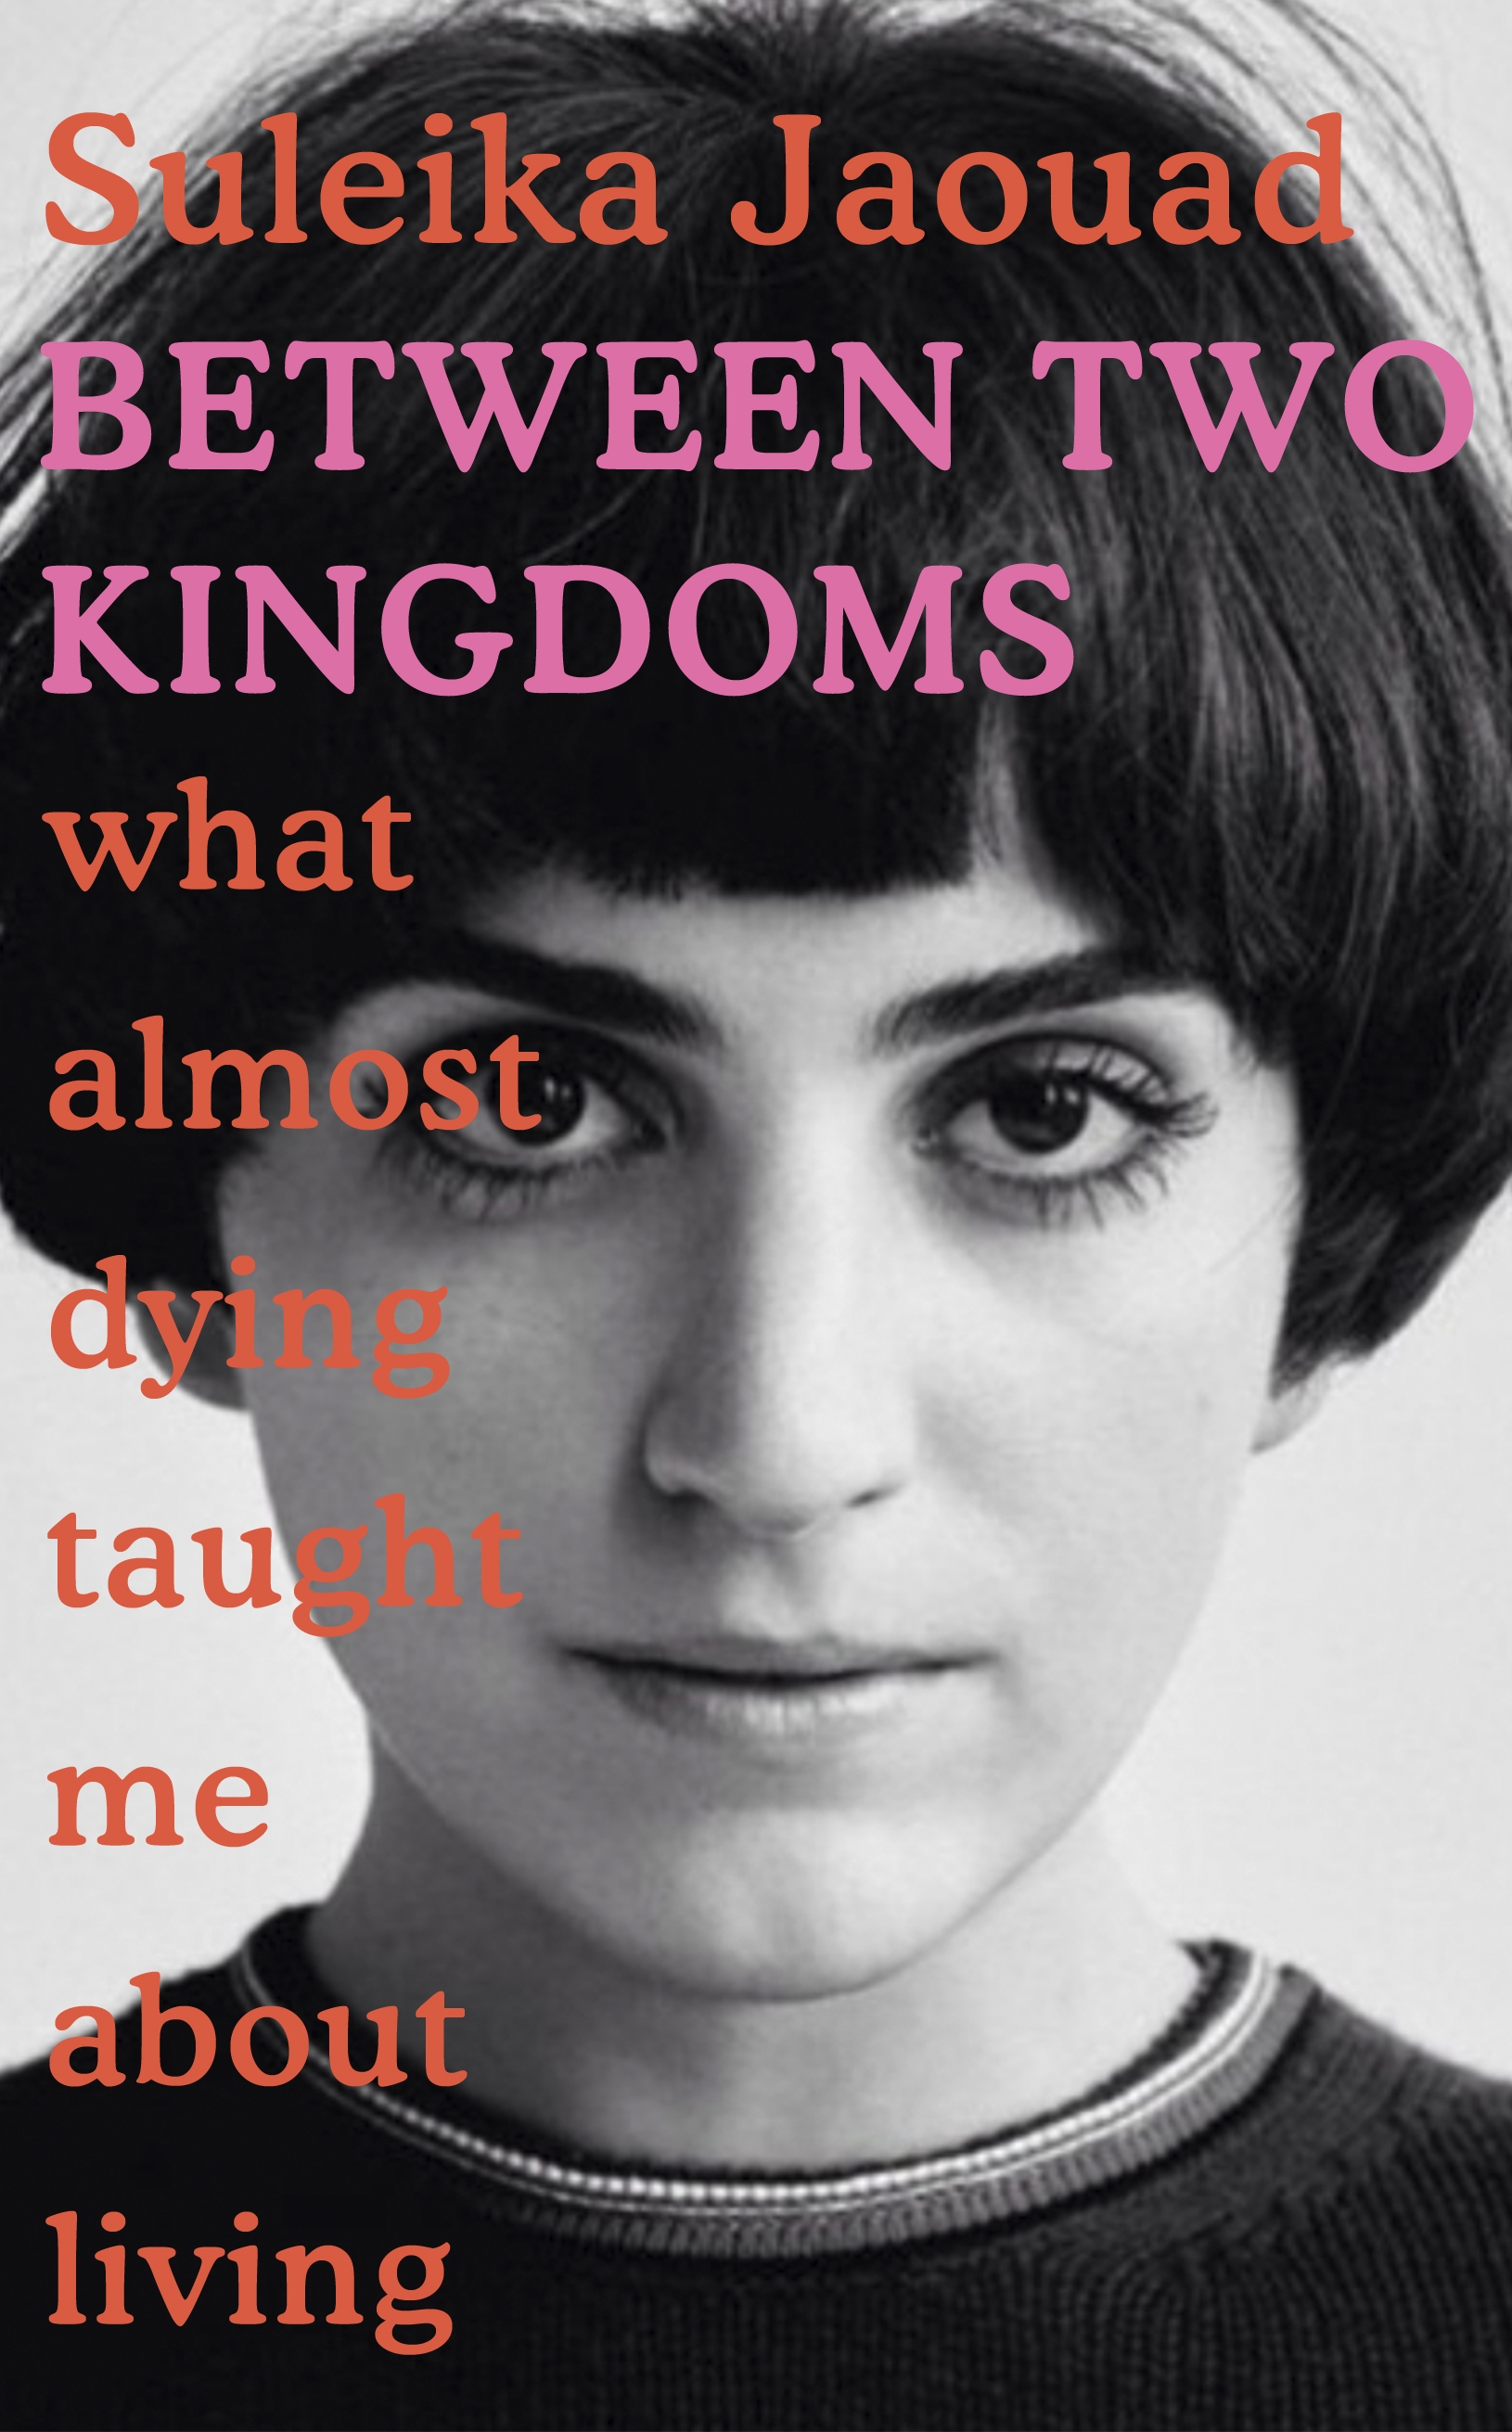 Between Two Kingdoms by Suleika Jaouad - Penguin Books New ...